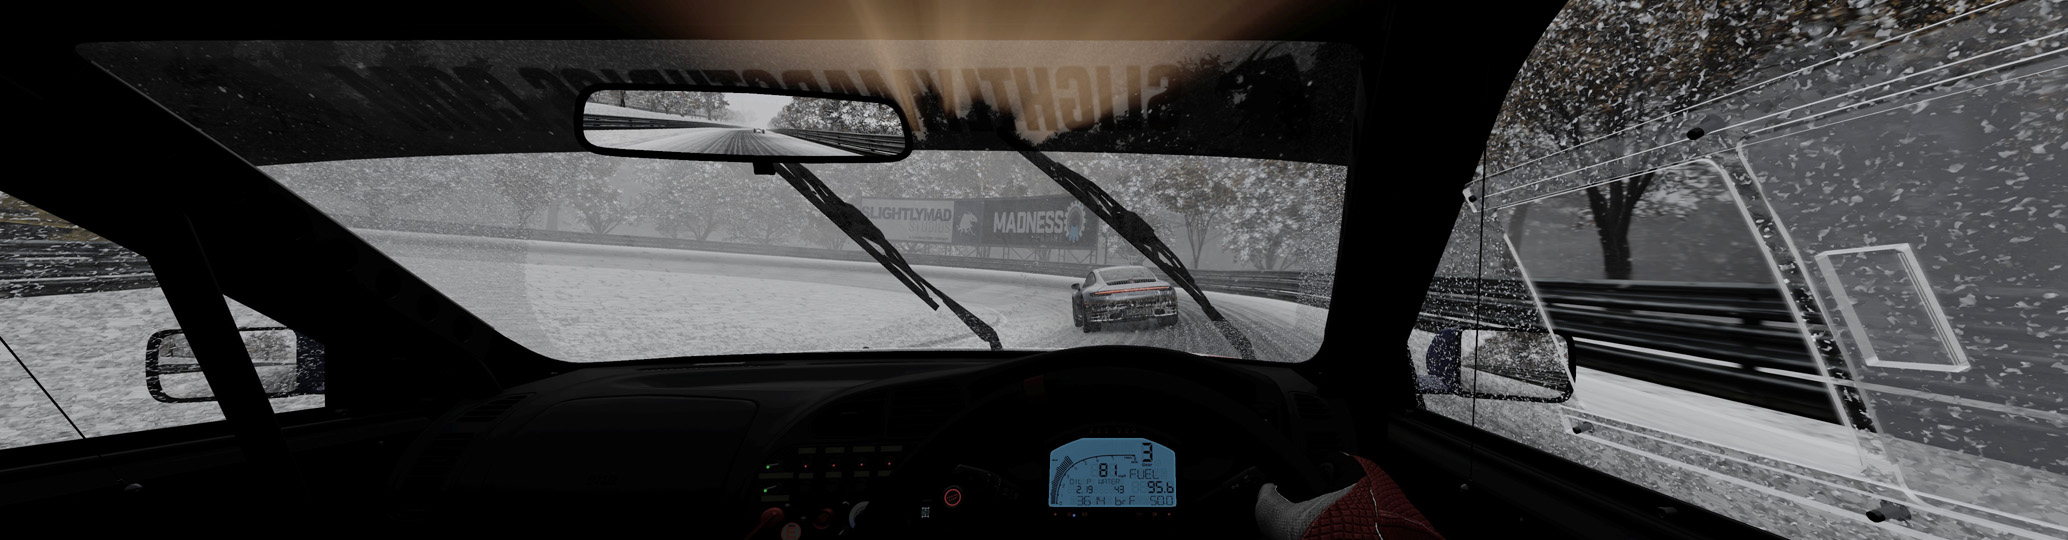 0a PROJECT CARS 3 LANCER EVO VI RACING at NORDS Snow crop copy.jpg